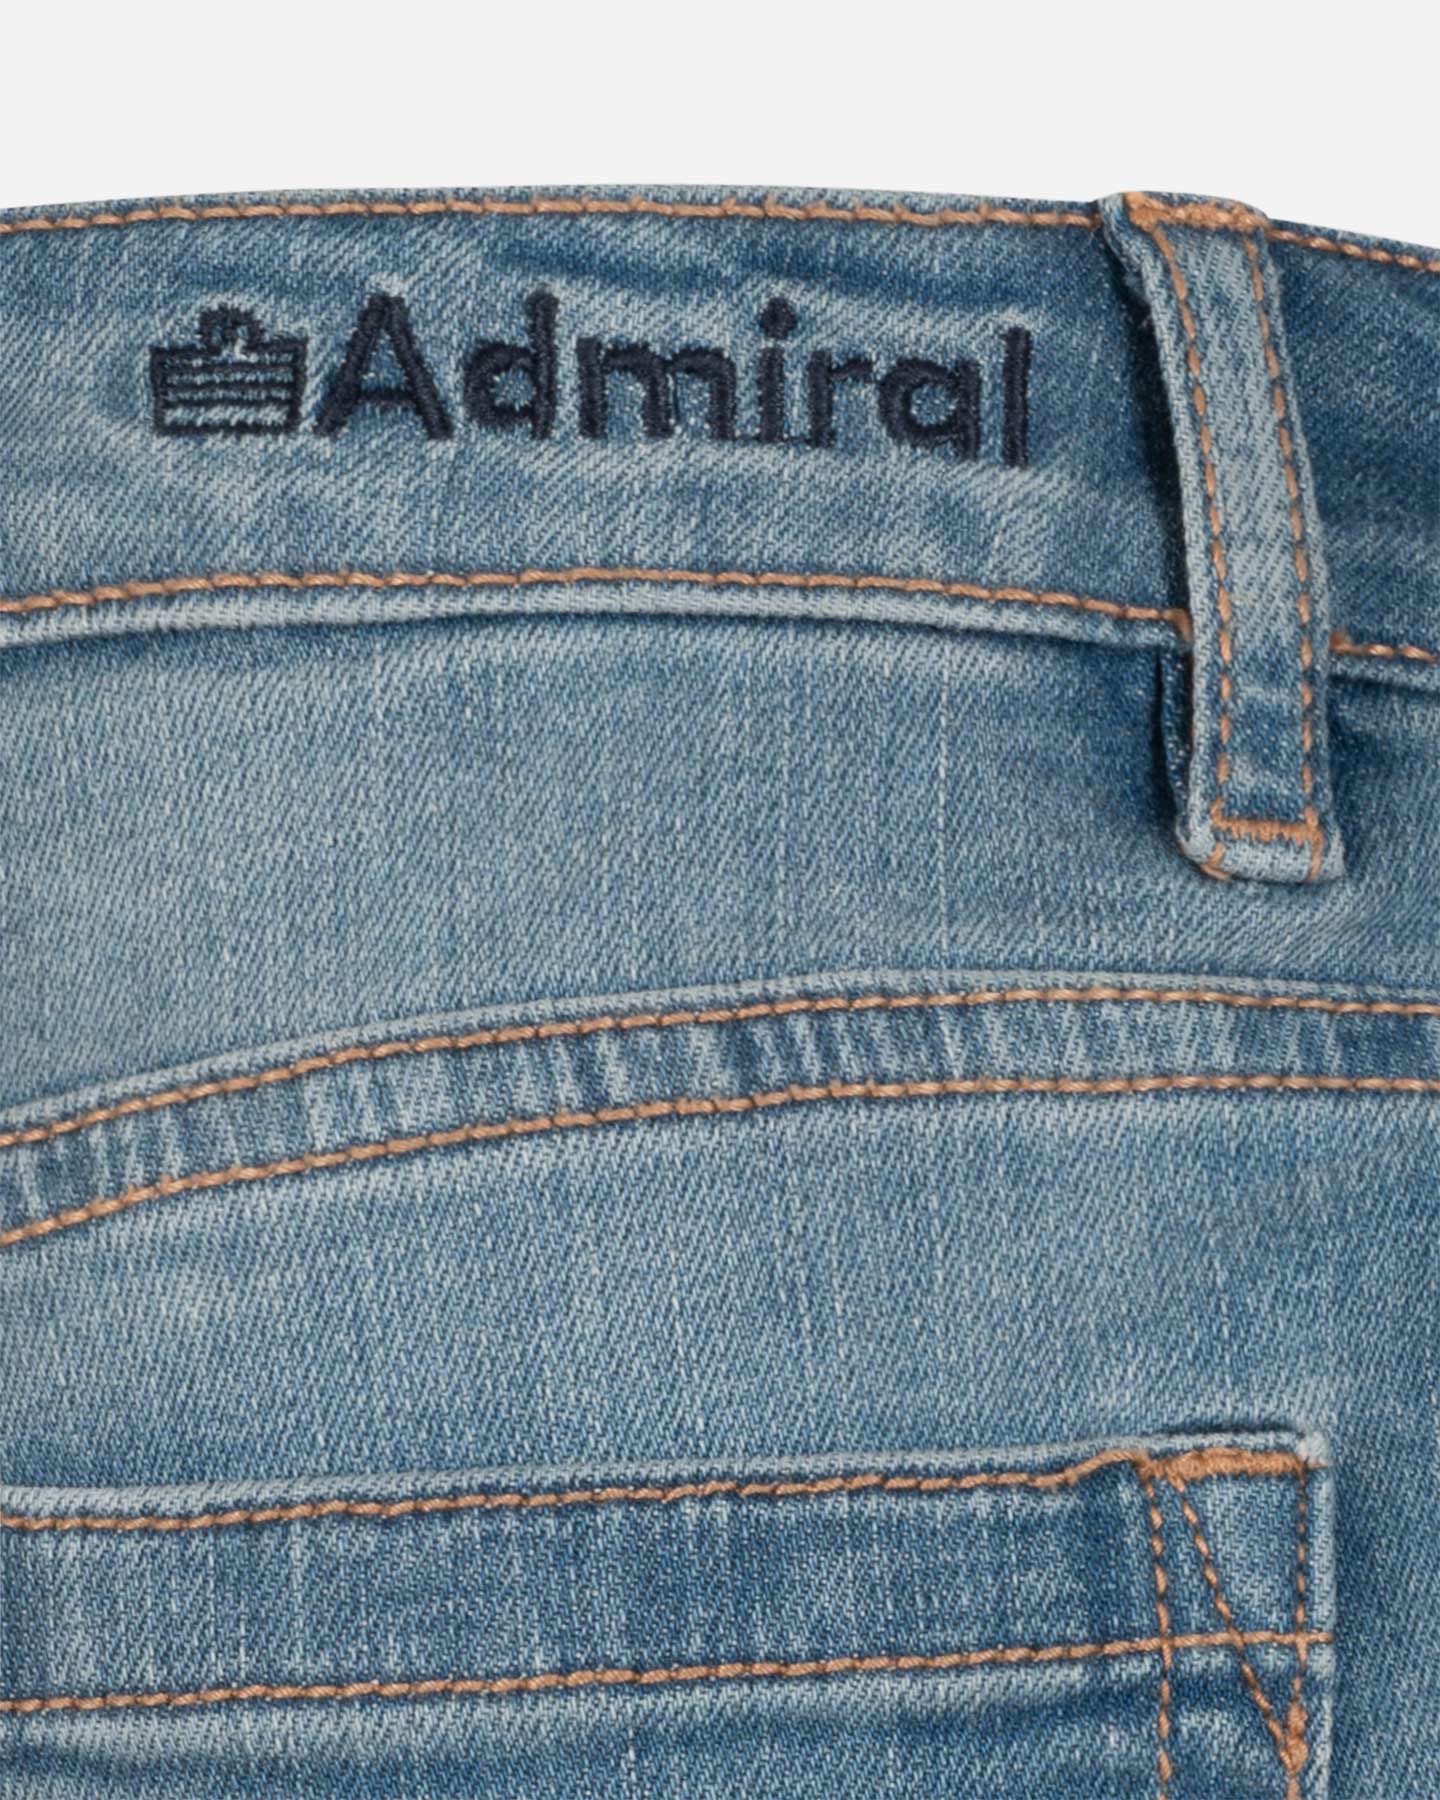  Jeans ADMIRAL LIFESTYLE JR S4130322|LD|6A scatto 2